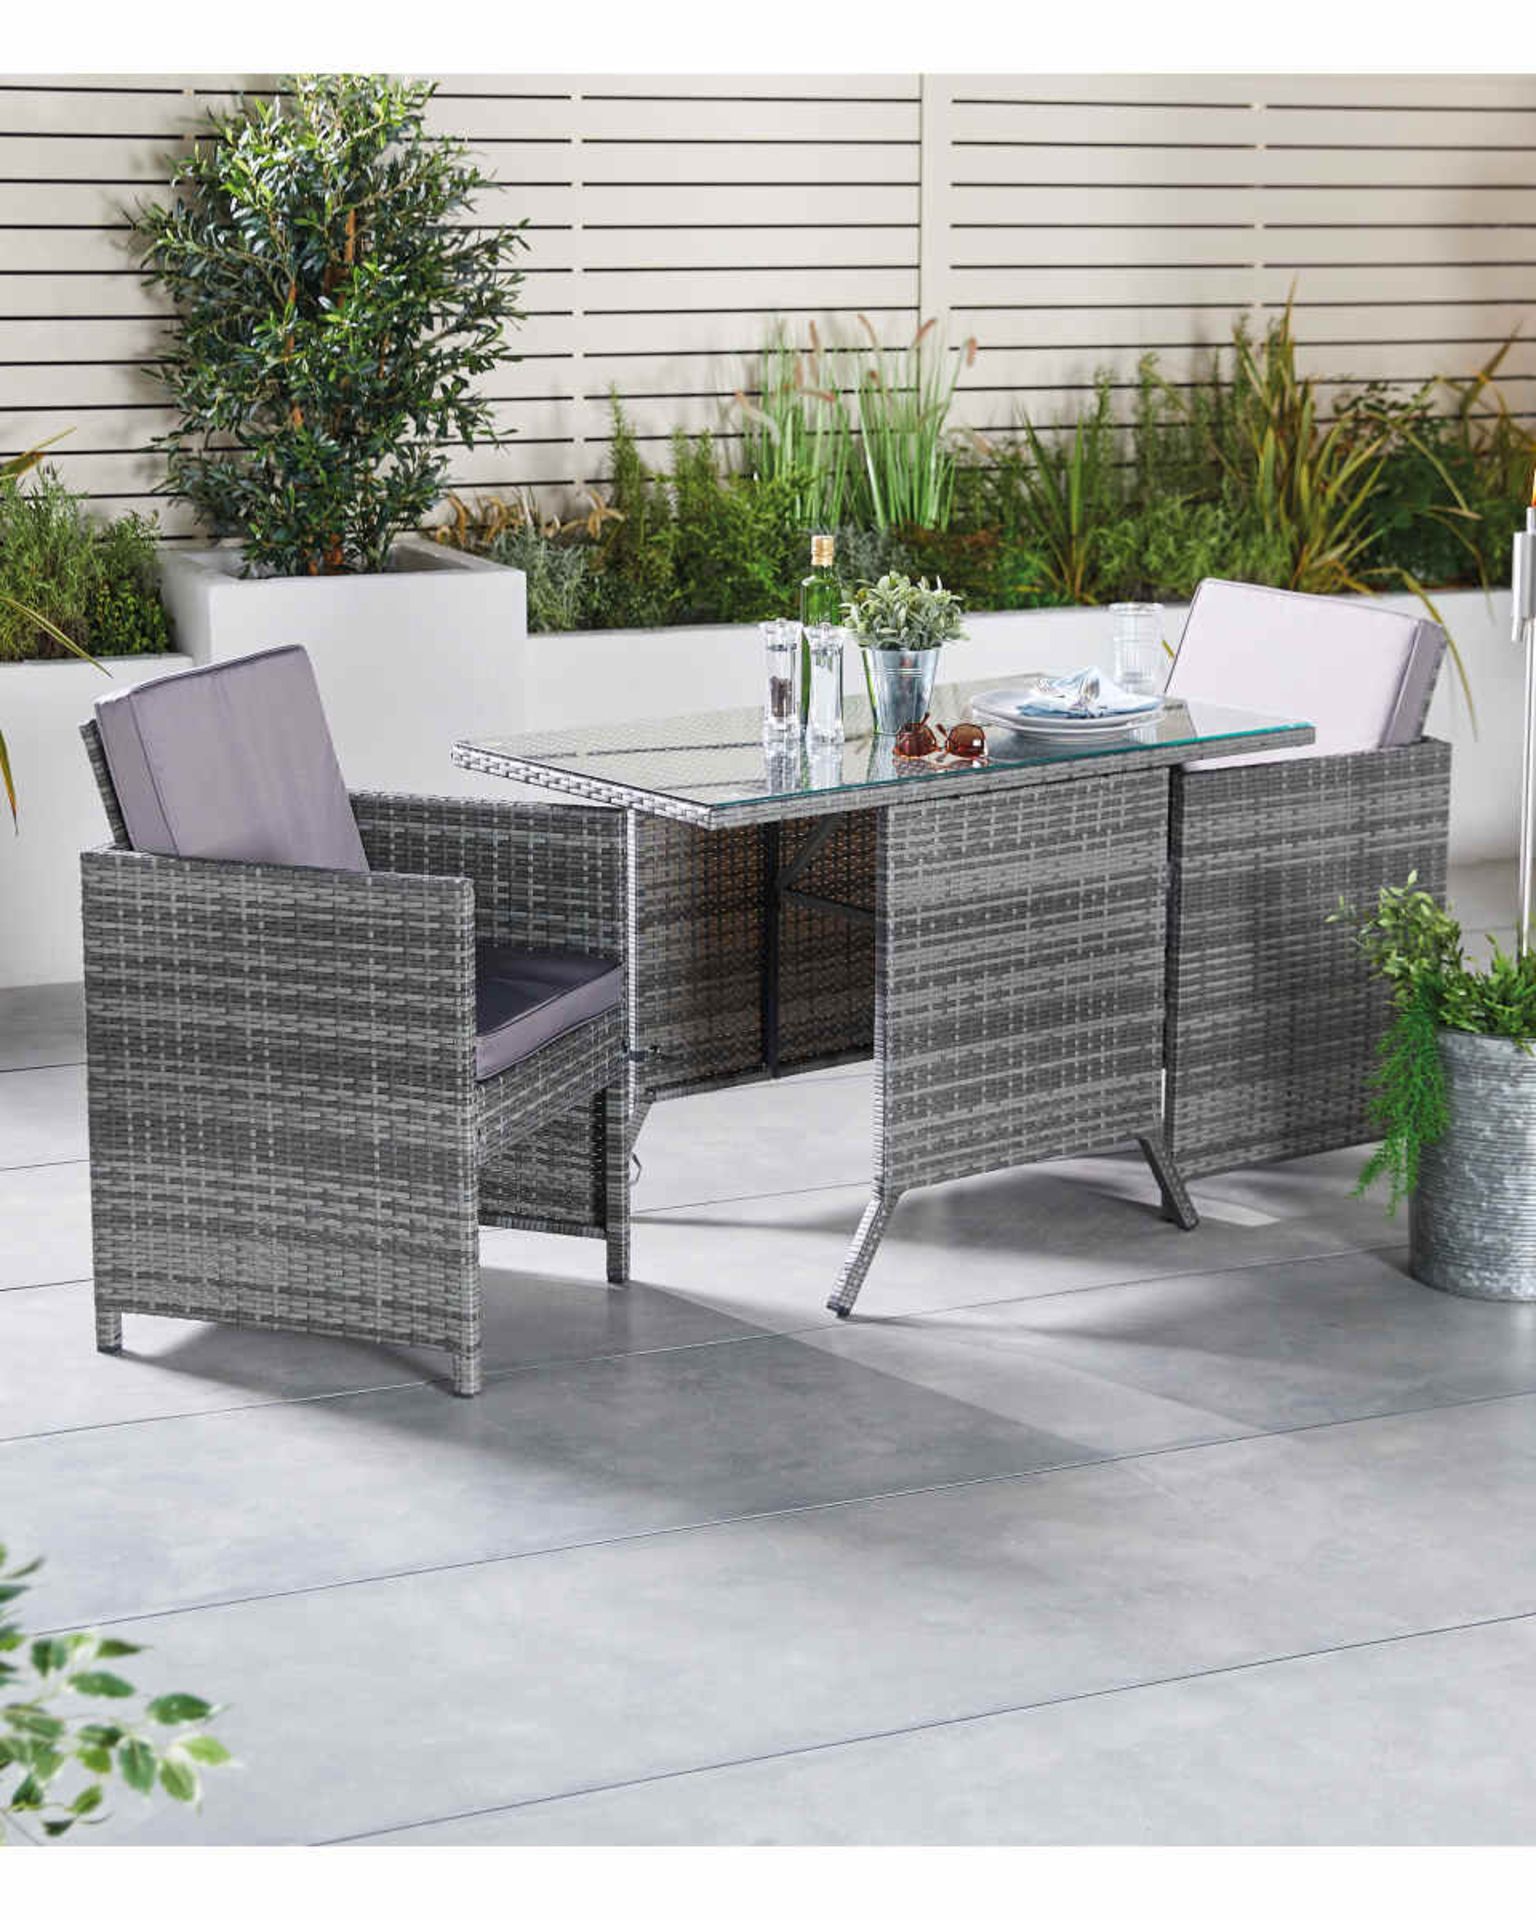 Luxury Compact 3 Piece Bistro Set. Upgrade your outdoor space with this Compact Bistro Set. This - Image 2 of 3